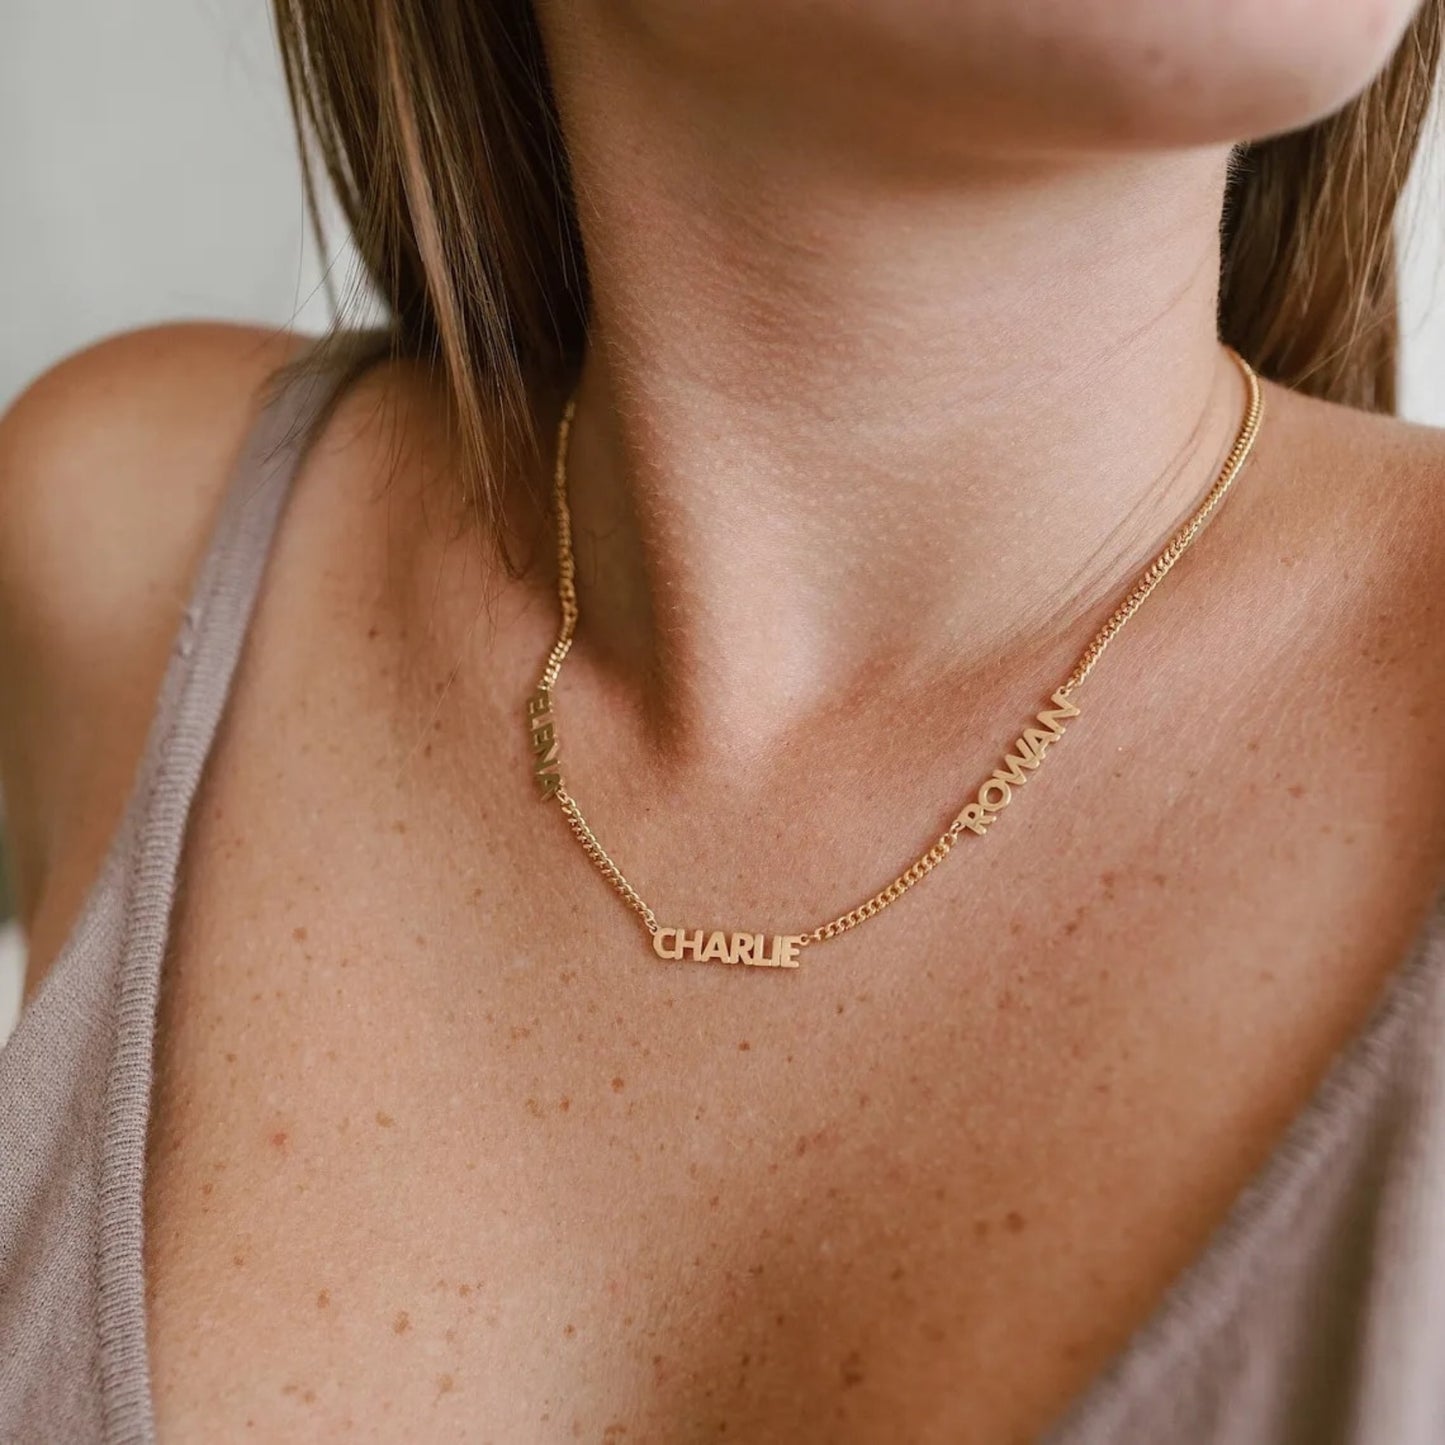 18K Gold Plated Stainless Steel Hypoallergenic Waterproof Tarnish Free Waterproof Sweatproof No-Fade I Am Who I Am Personalized Necklace The Aura